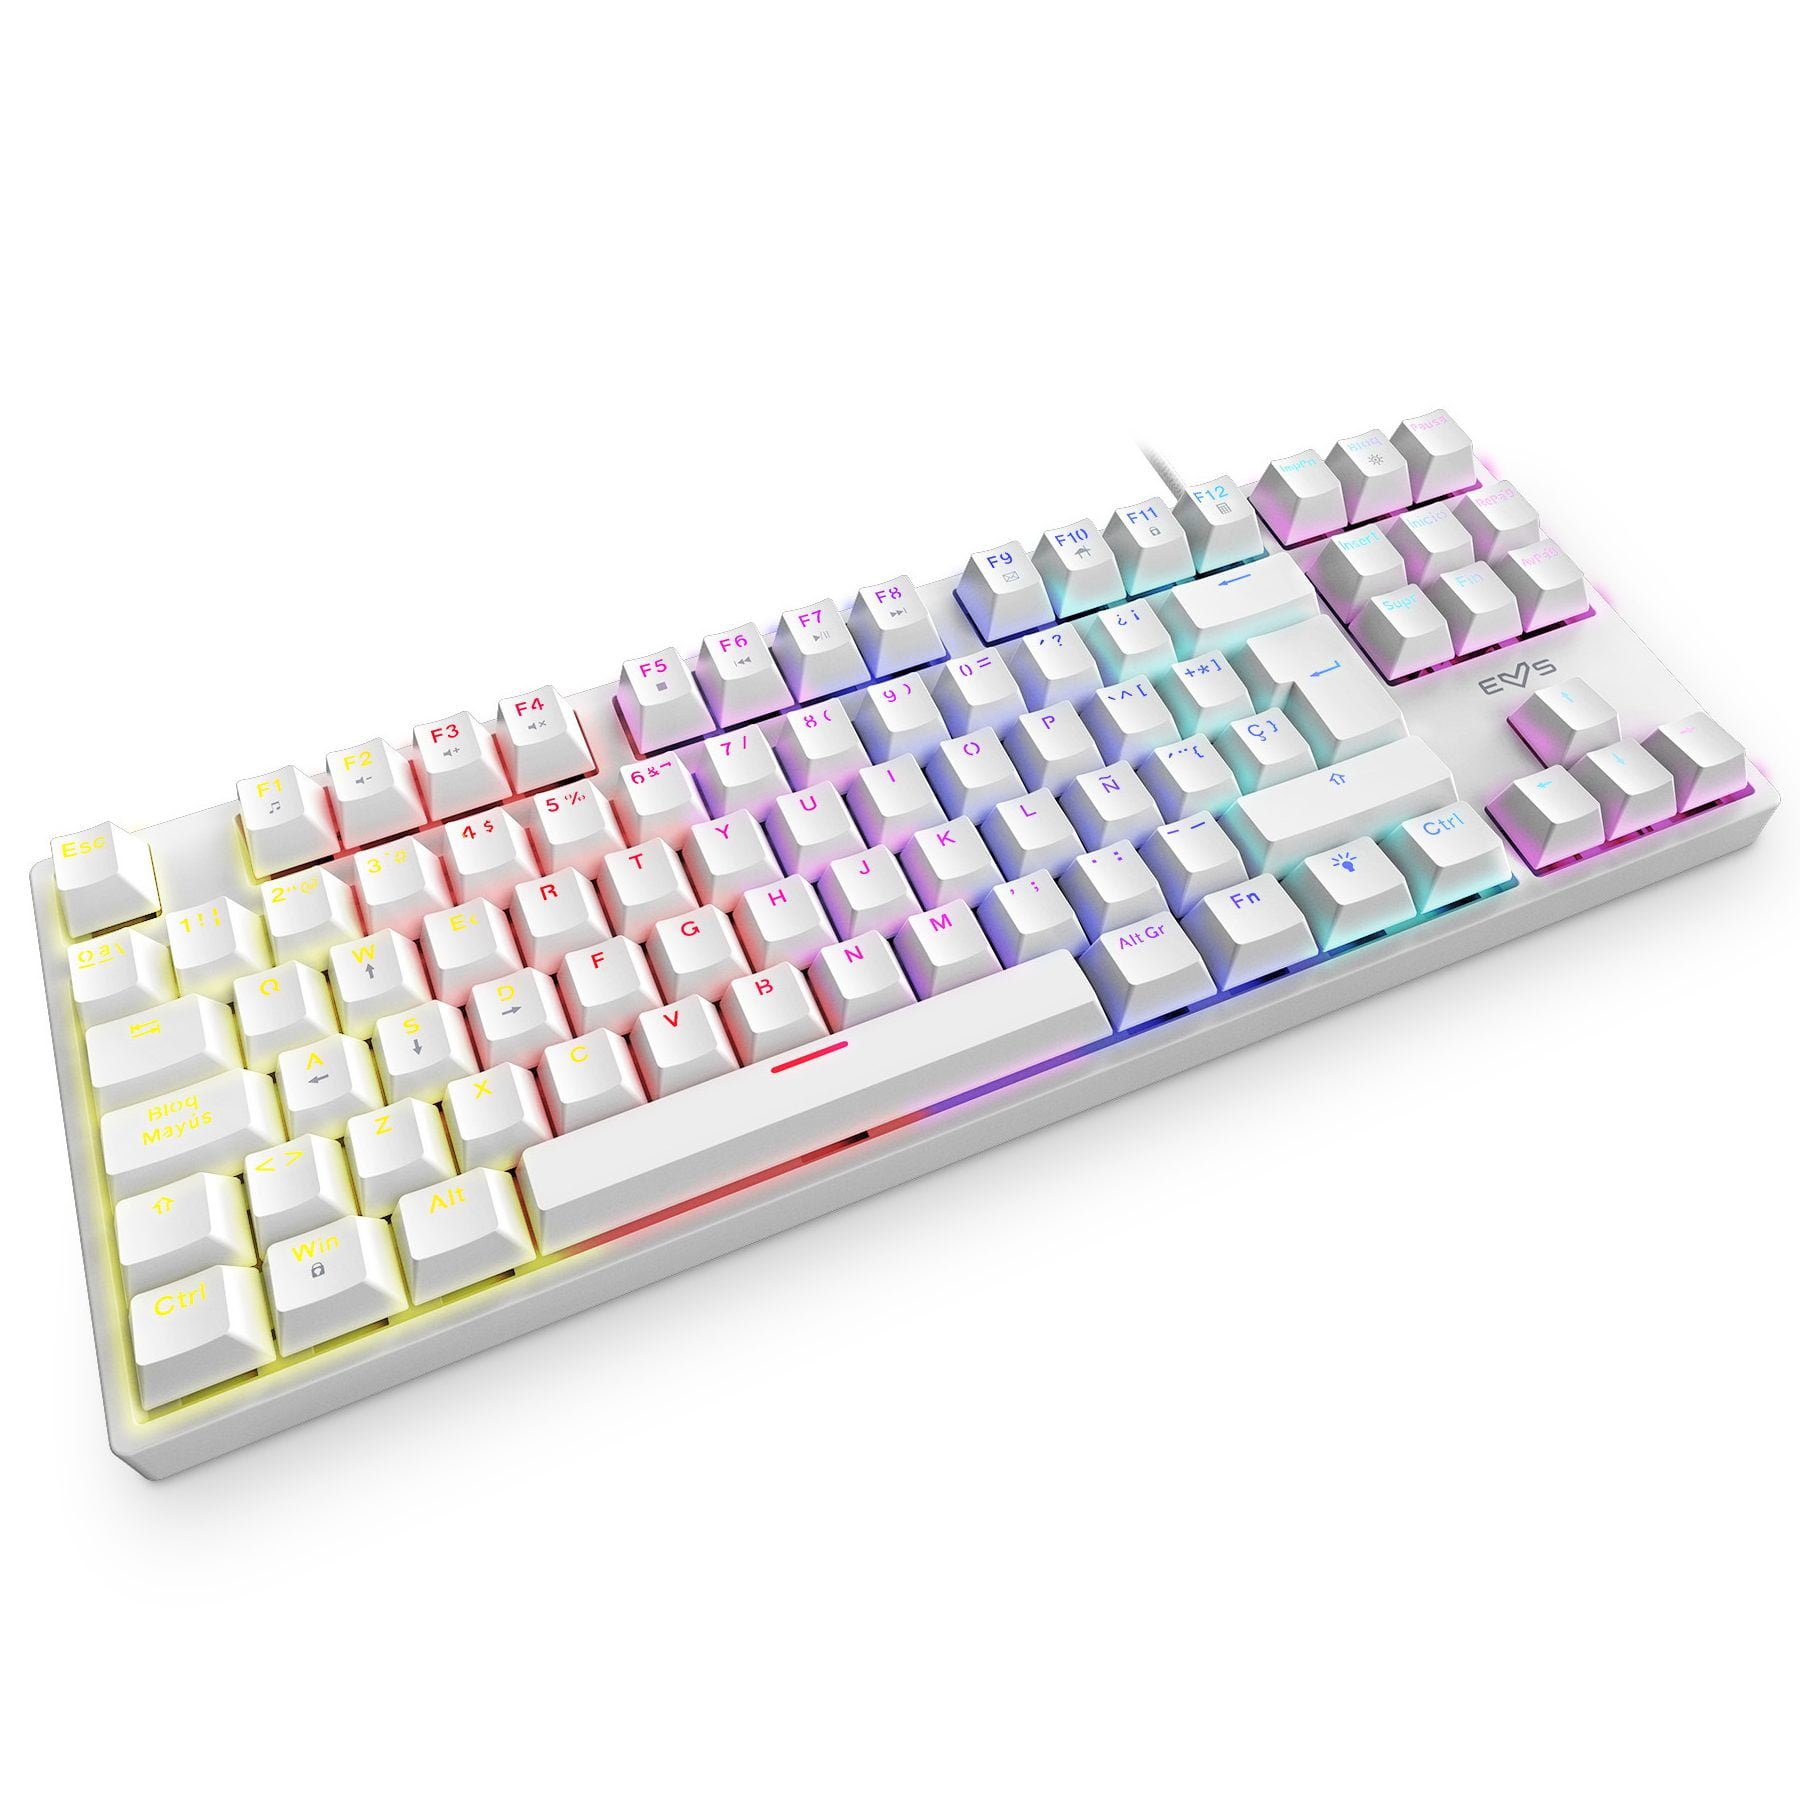 Hk gaming: Gaming accessories brand. The company specializes in mechanical keyboards.